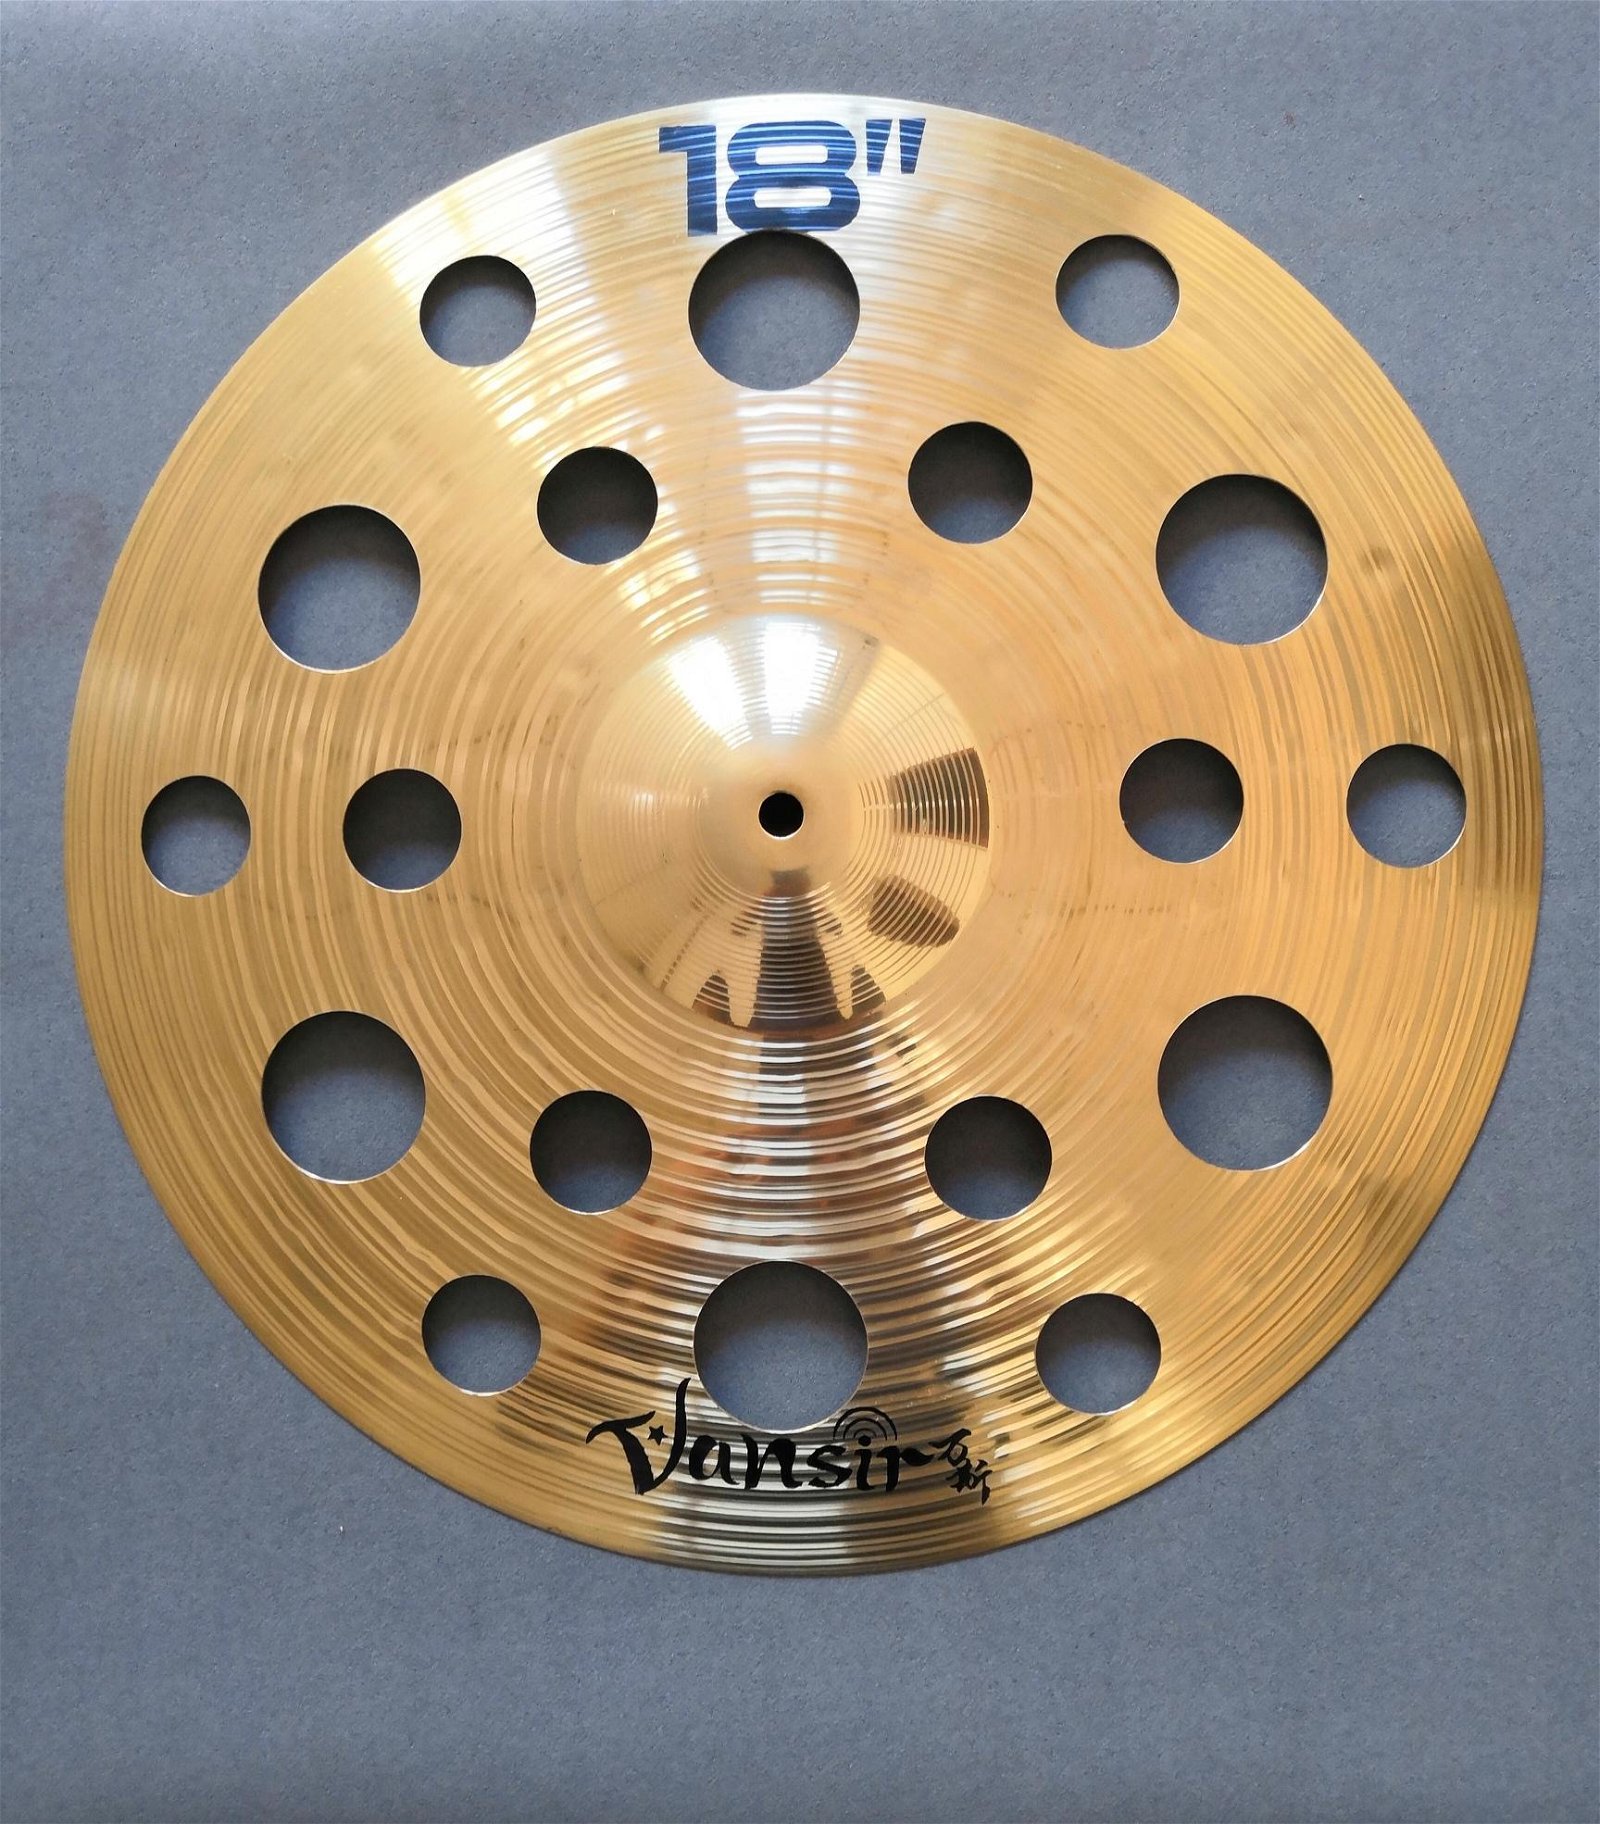  Brass Cymbals for Percussion Drum Set 4